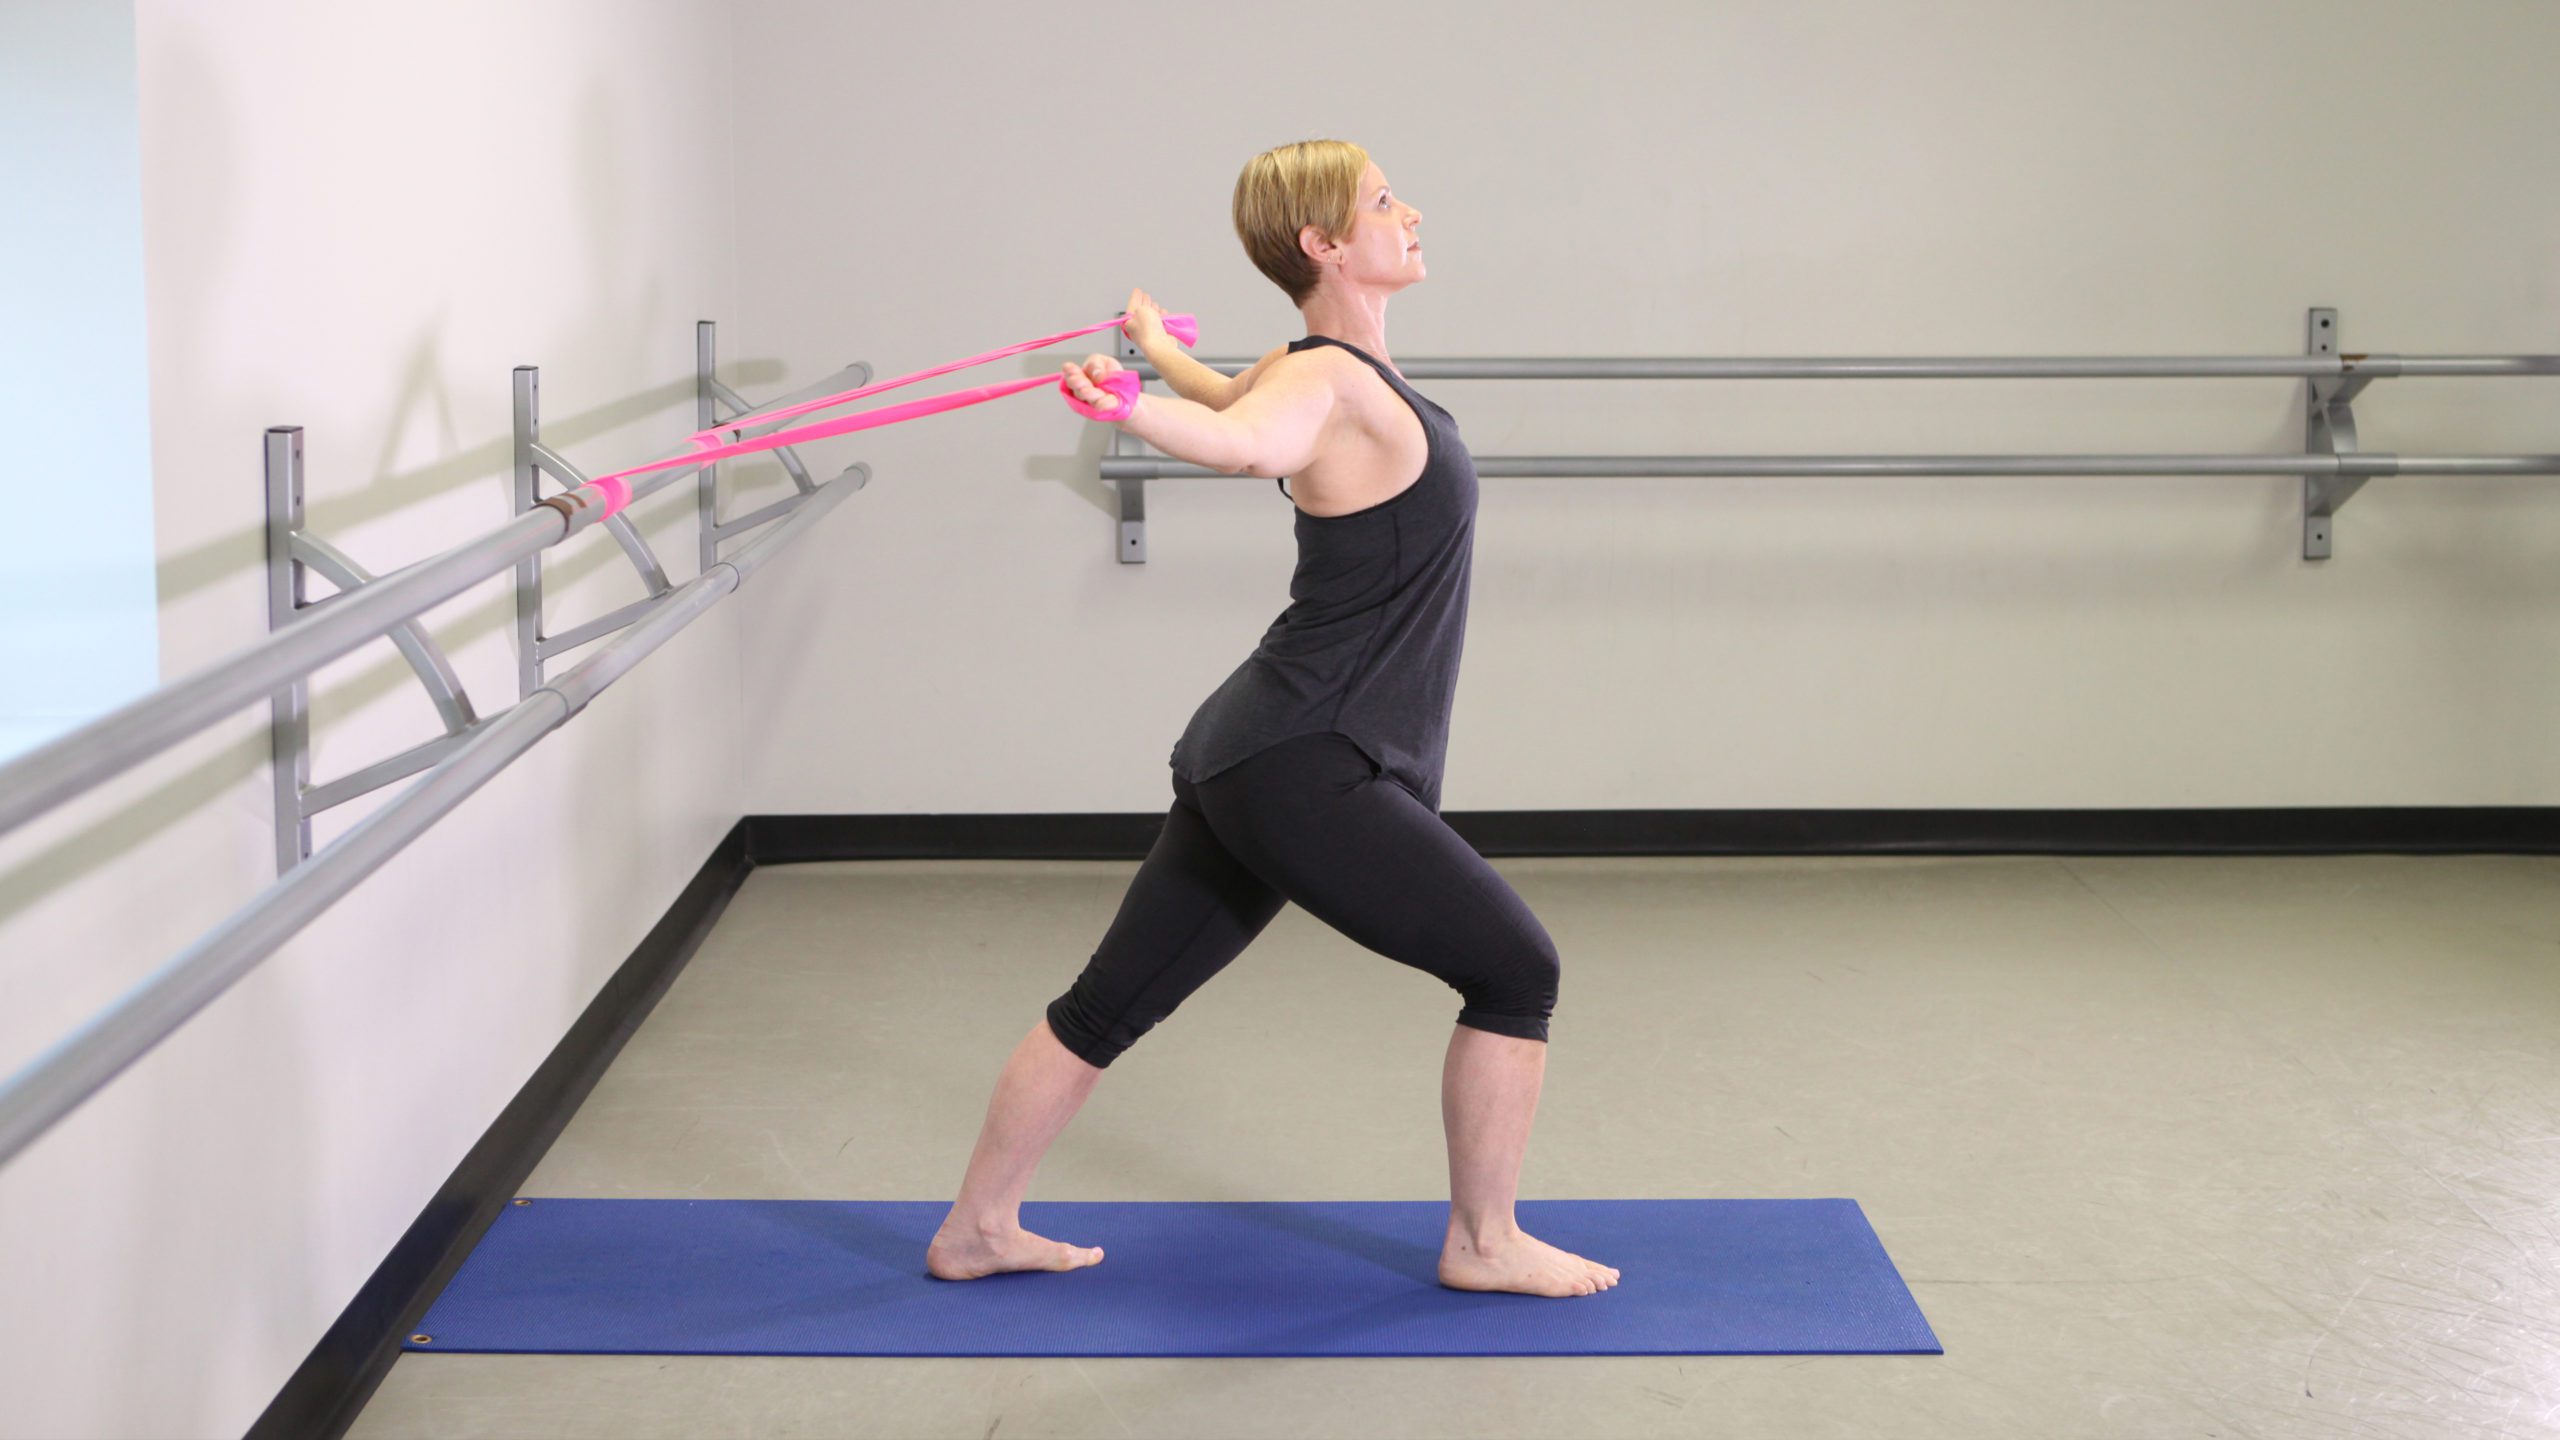 Pink Pilates: A Workshop for Breast Cancer Warriors, is planned for Oct.  21, at Pilates + Yoga